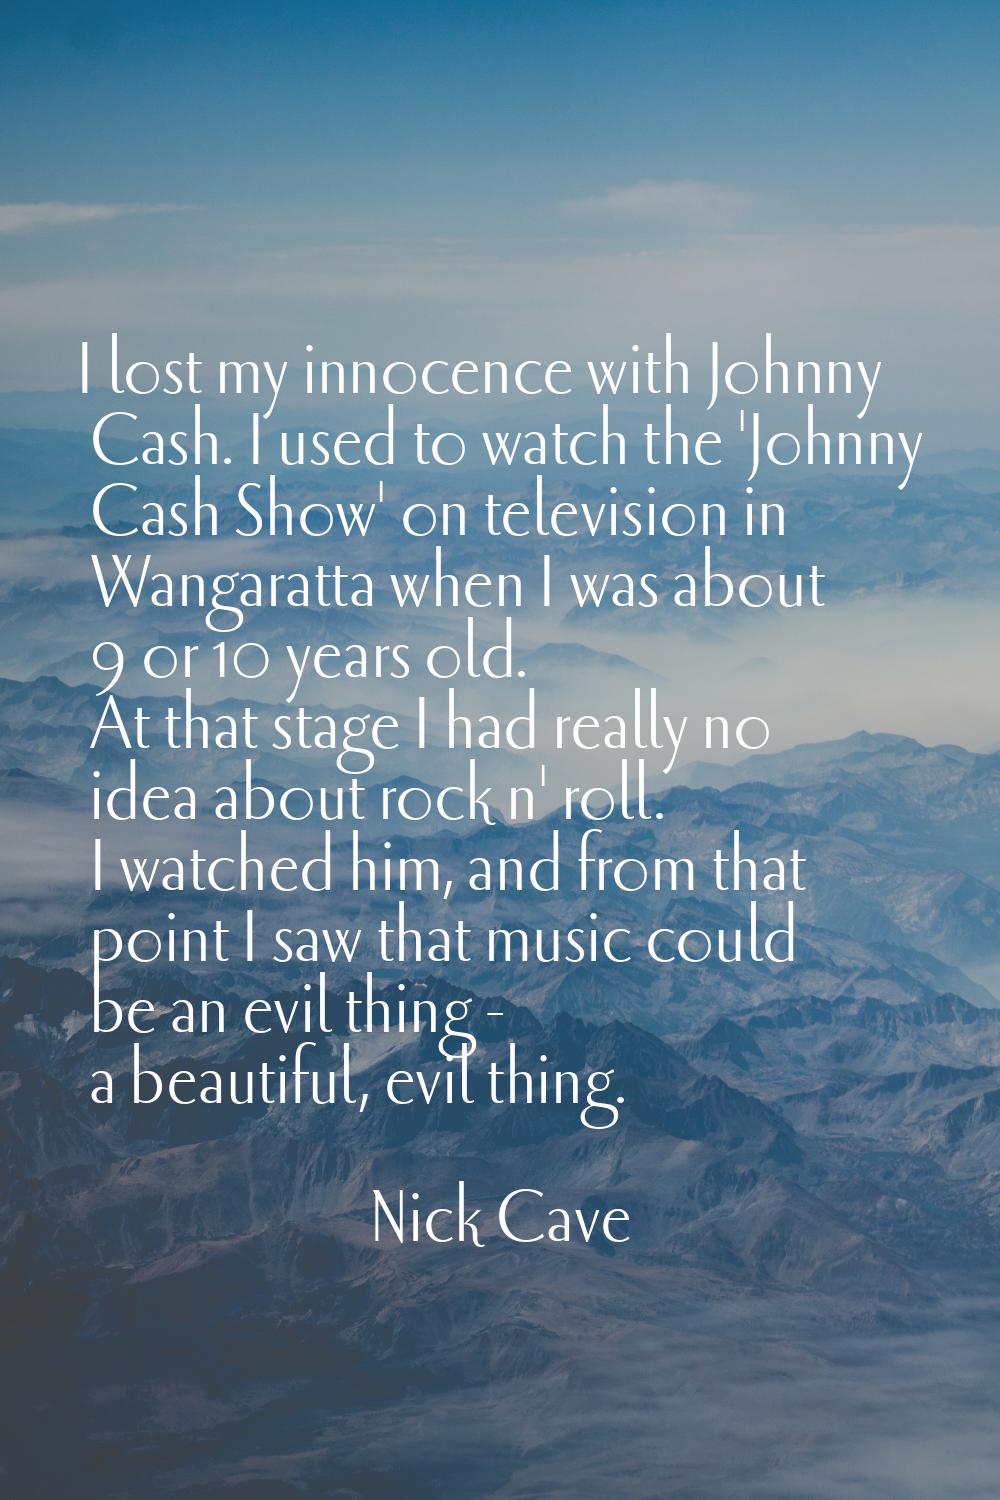 I lost my innocence with Johnny Cash. I used to watch the 'Johnny Cash Show' on television in Wanga